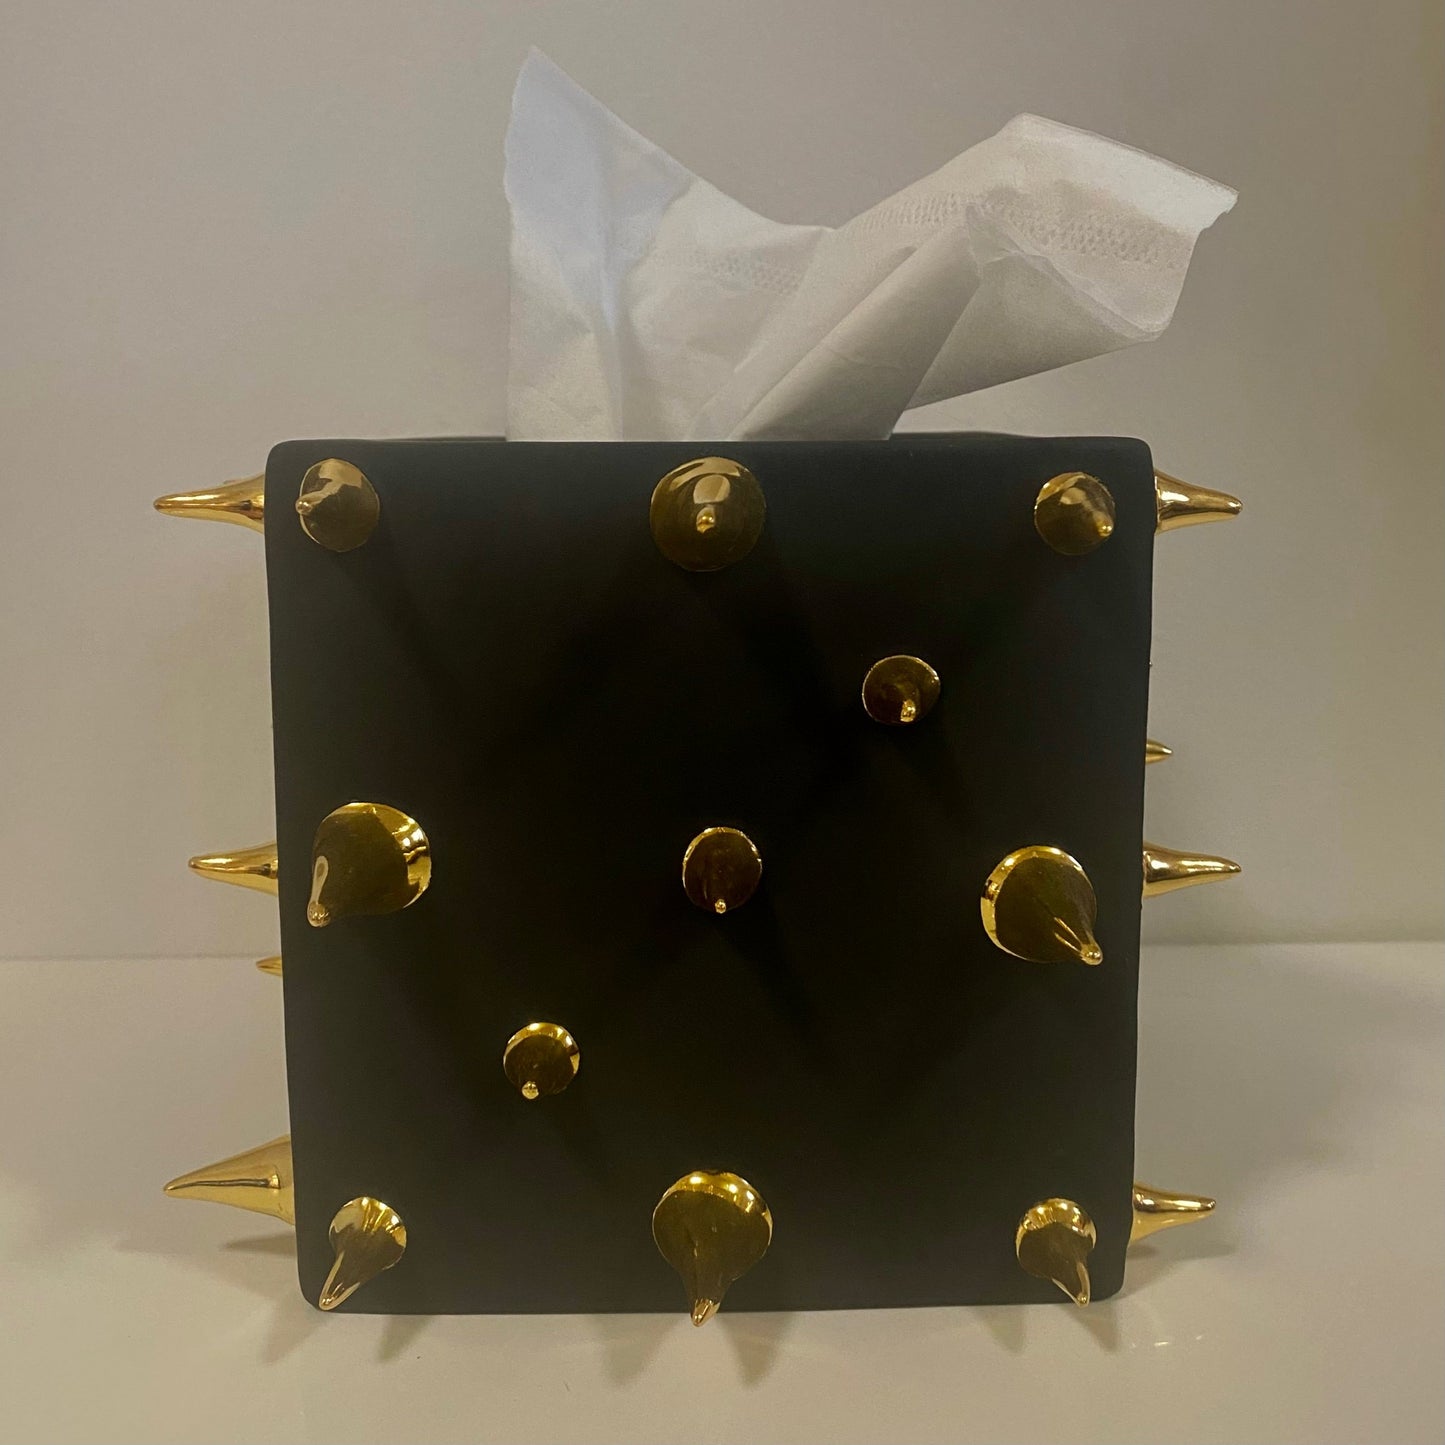 Waylande Gregory Tissue Box with Gold Thorns